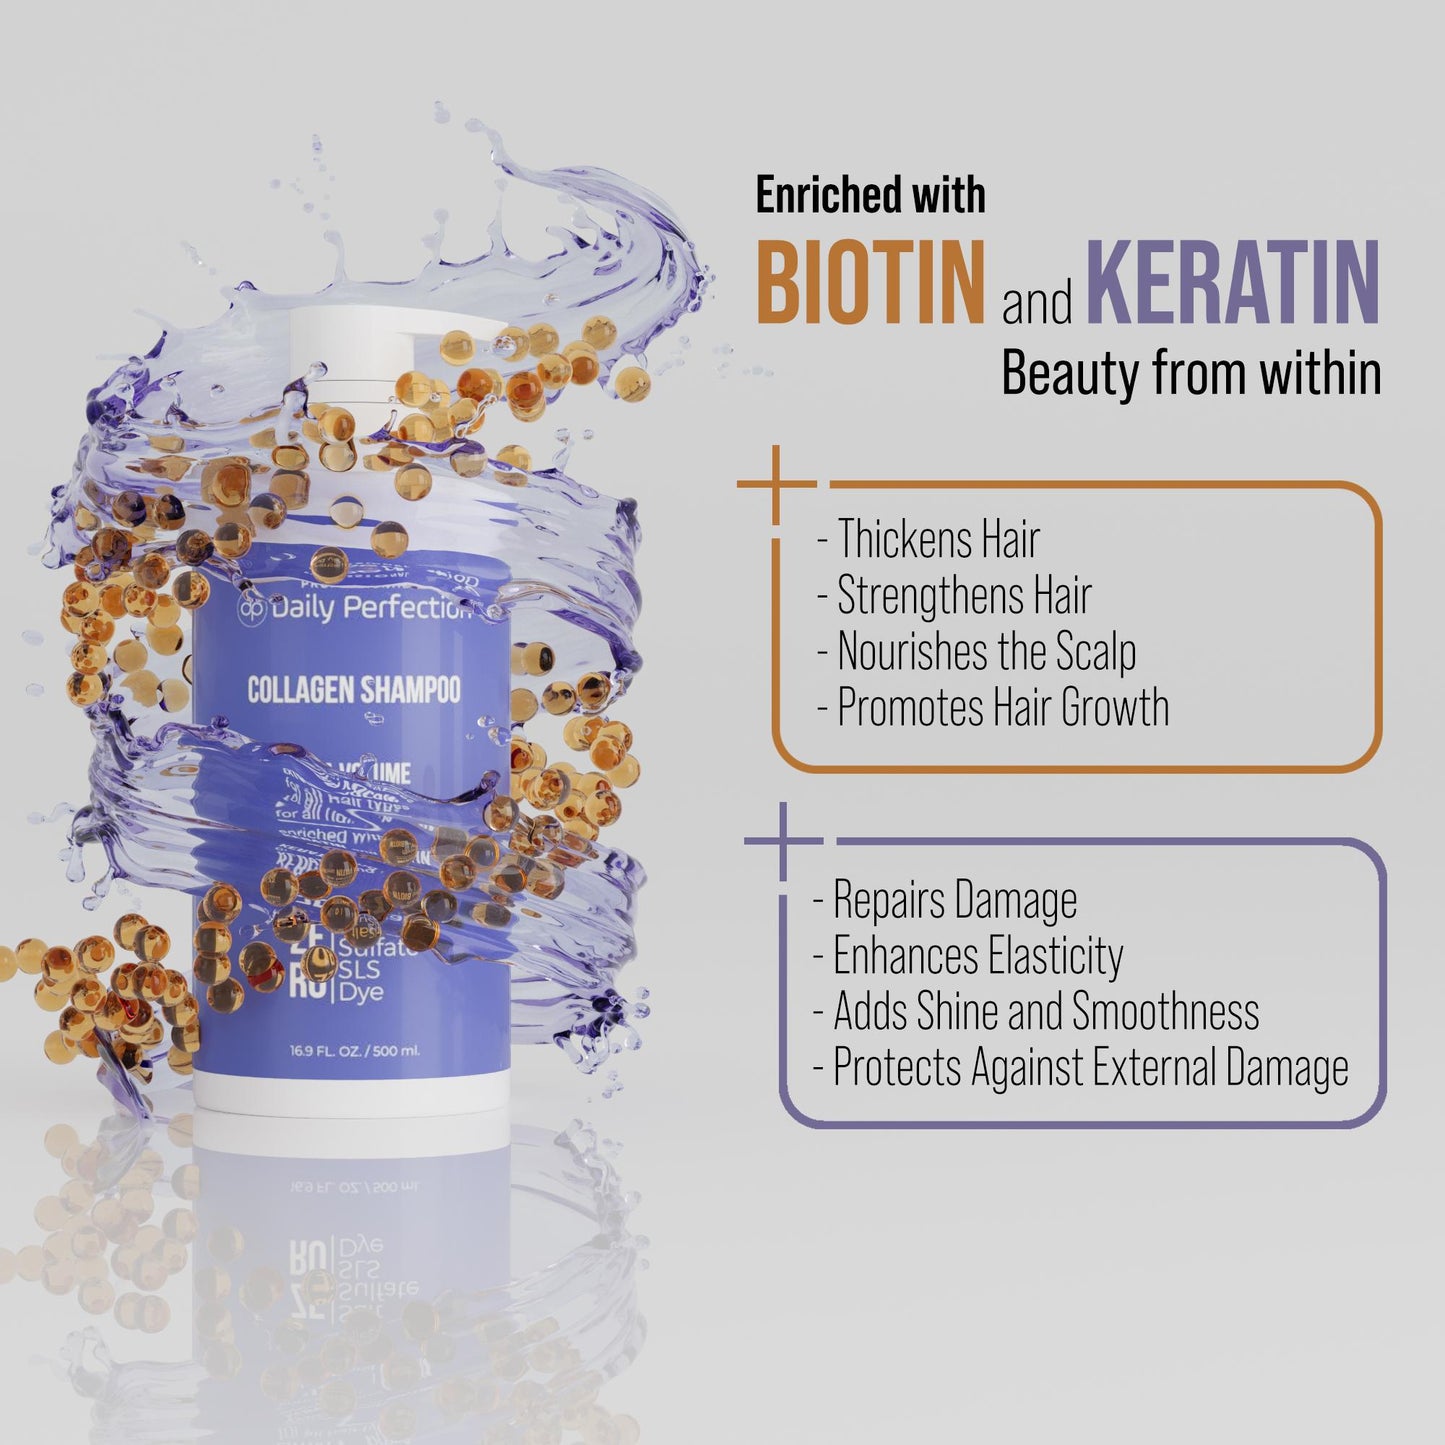 infographic explains the benefits of biotin and kertain boosts which are used in Daily Perfection Collagen Shampoo